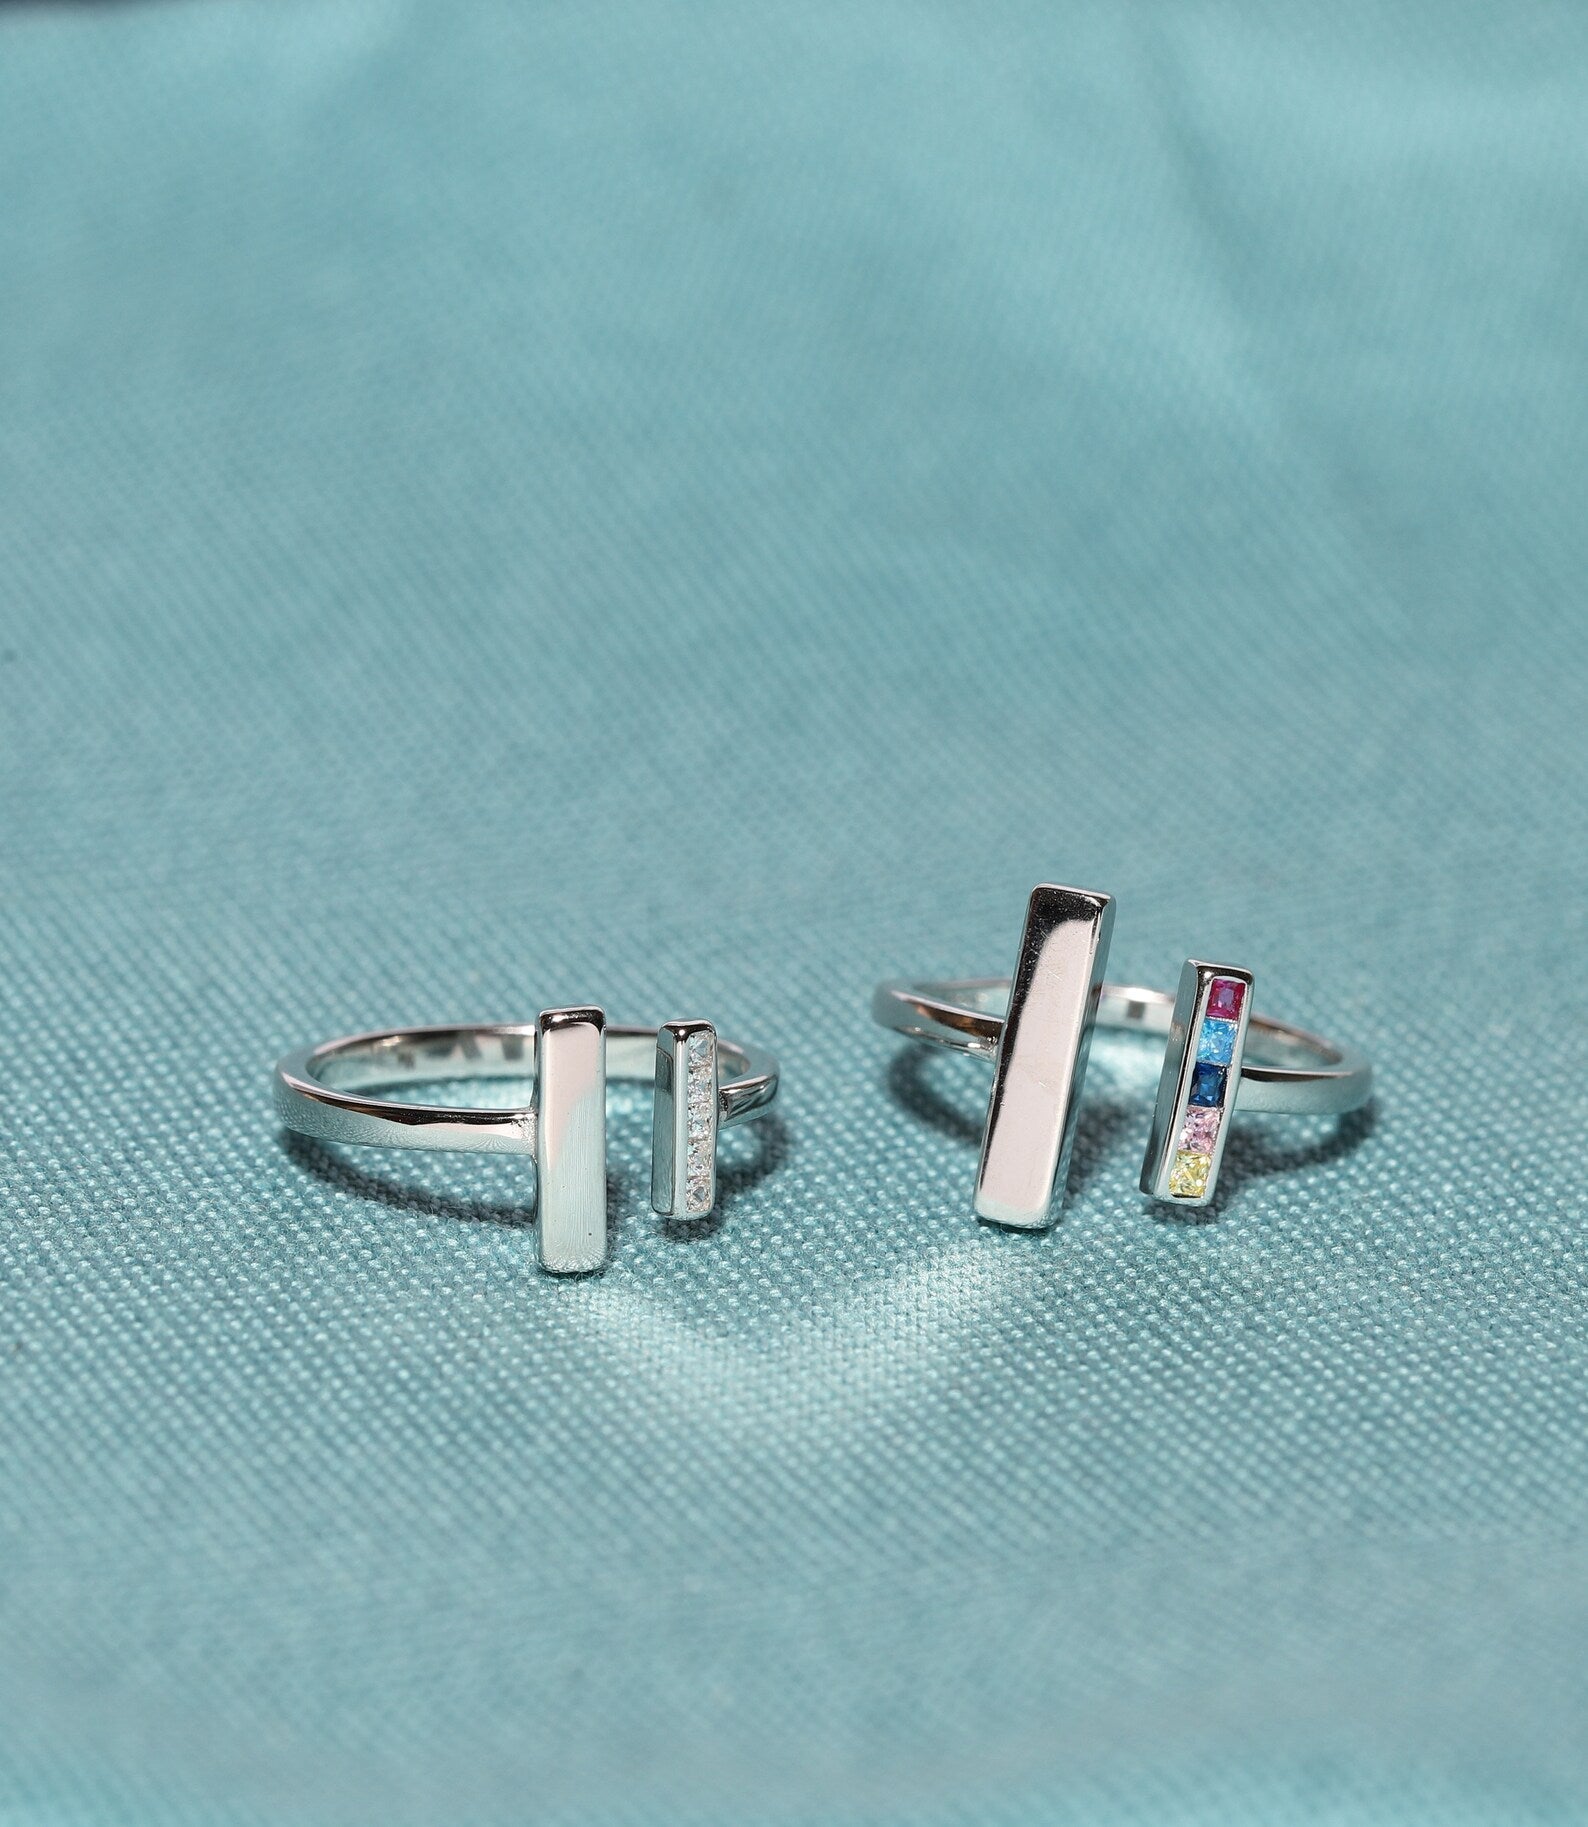 BESTIES THROUGH THICK AND THIN RING - Camillaboutiqueco camillaboutiqueshop.com